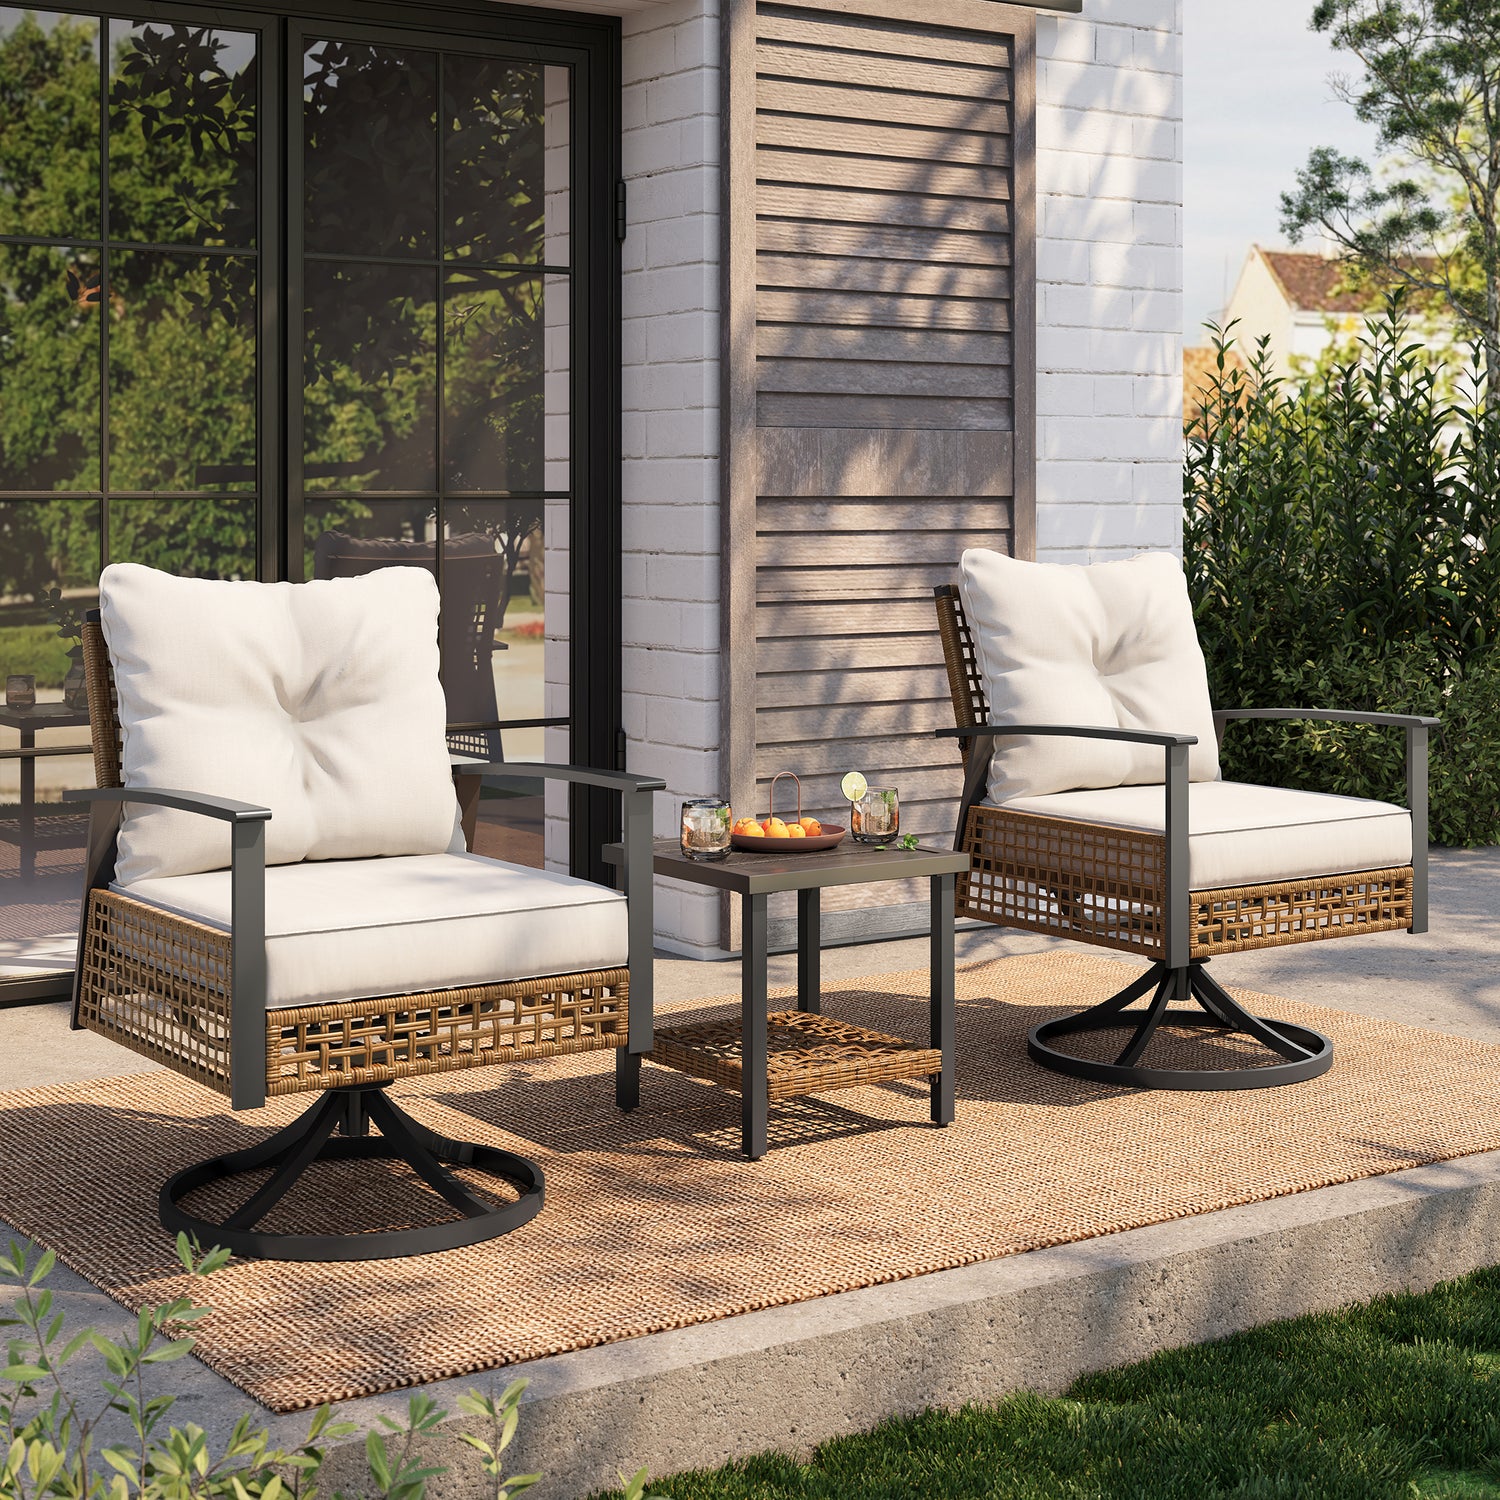 LAUSAINT HOME 3 Pieces Outdoor Swivel Chair